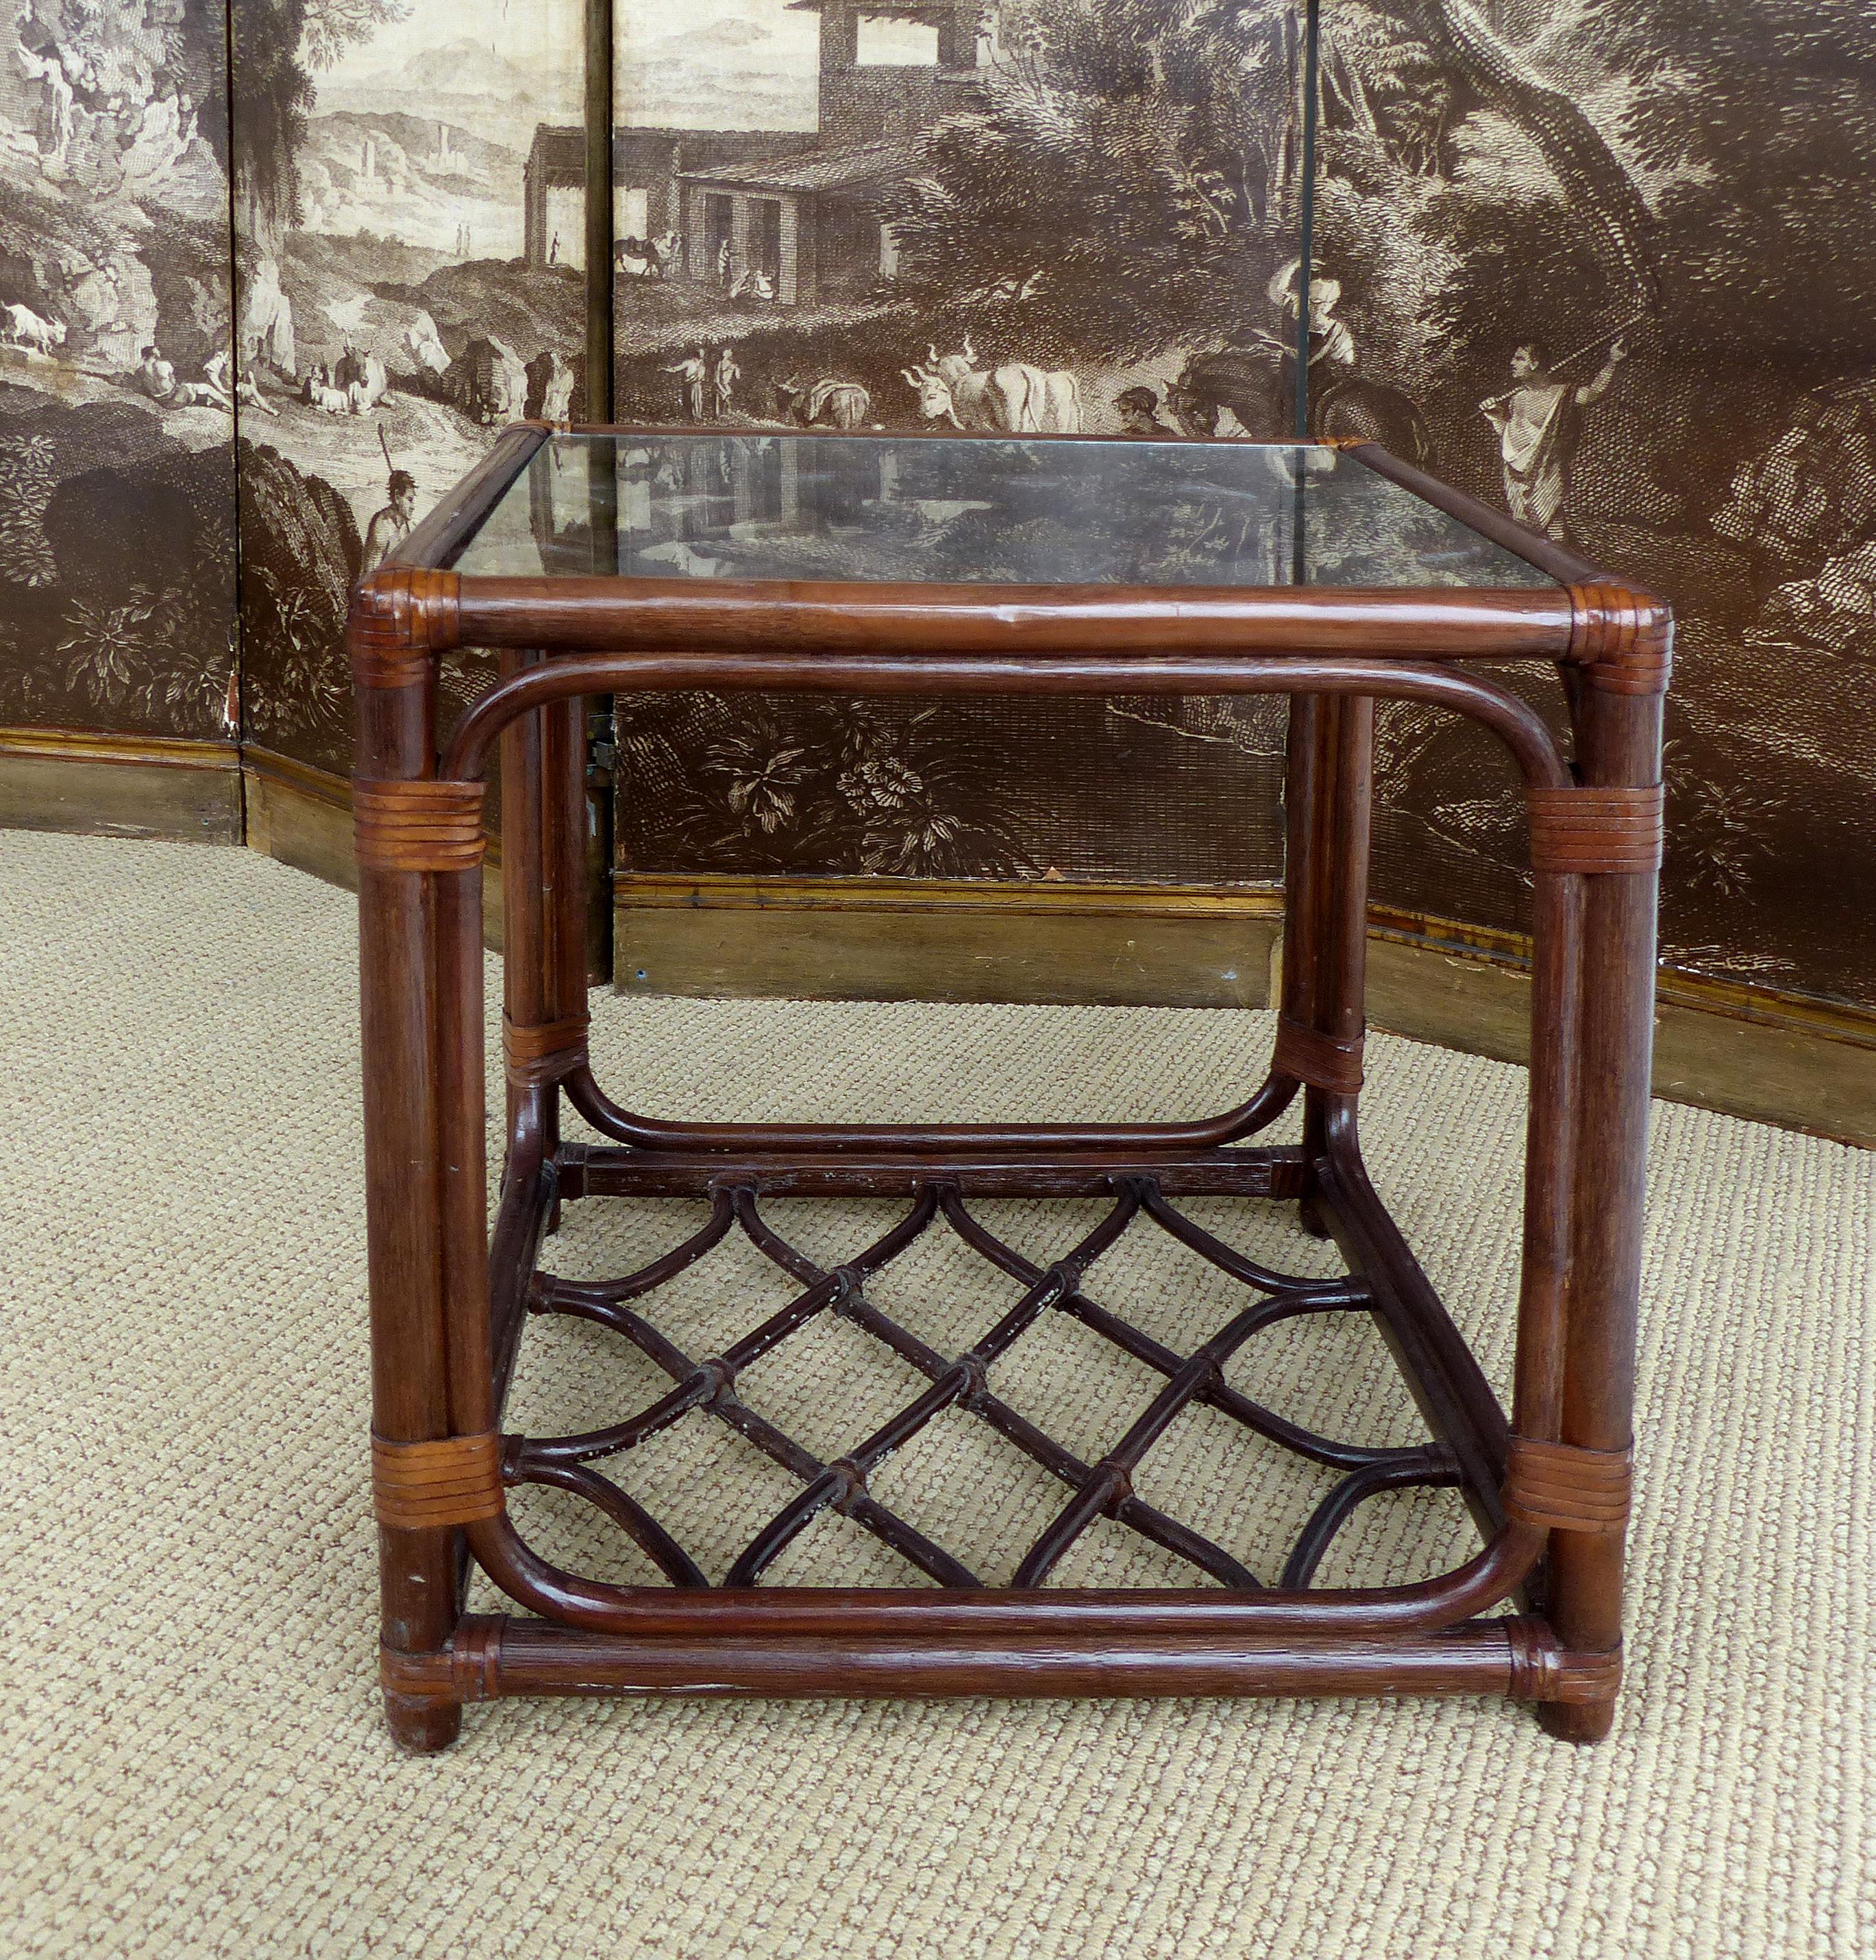 Rattan Side Table, Criss Cross Design, Leather Strapping attributed to McGuire

Offered for sale is a square rattan side table, attributed to McGuire,  with leather wrapped details and ends. The table has a recessed glass top and an additional shelf